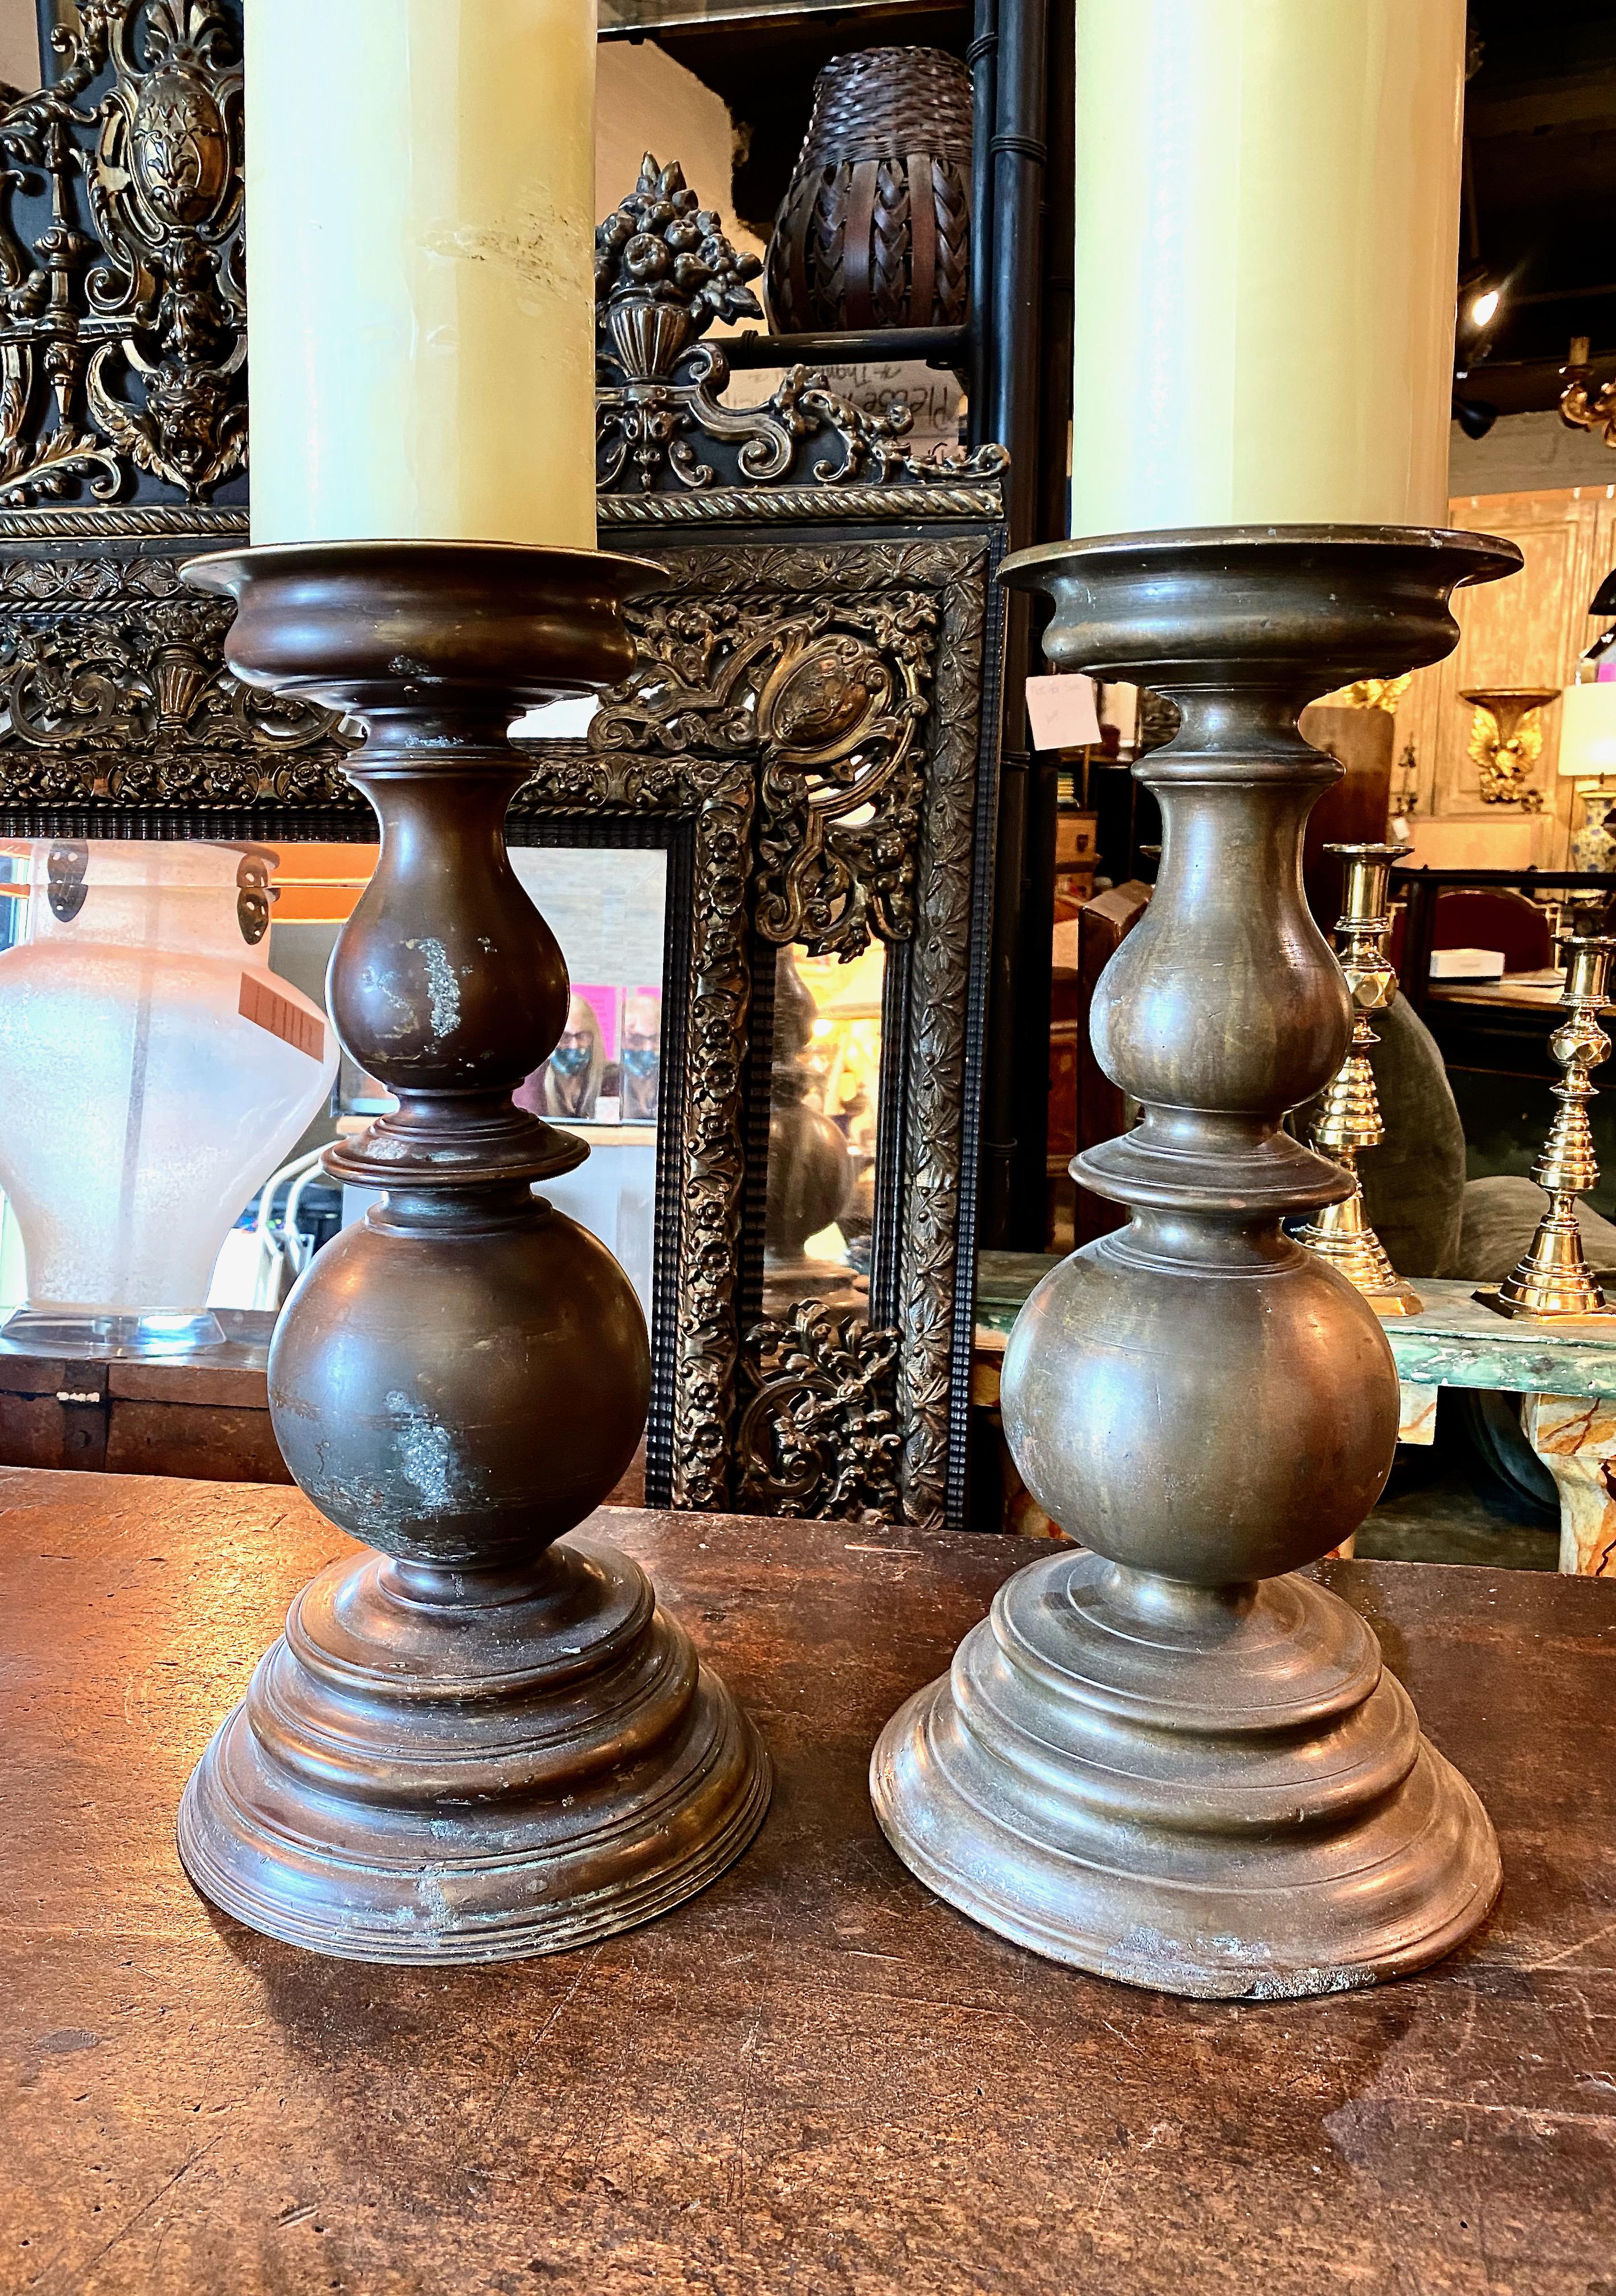 This is a classic pair of fine late 17th century Italian cast bronze pricket sticks, This large pair features a rich natural patina, boldly cast turning and stepped cast base. Over their nearly 350 years of use, the candlesticks exhibit normal